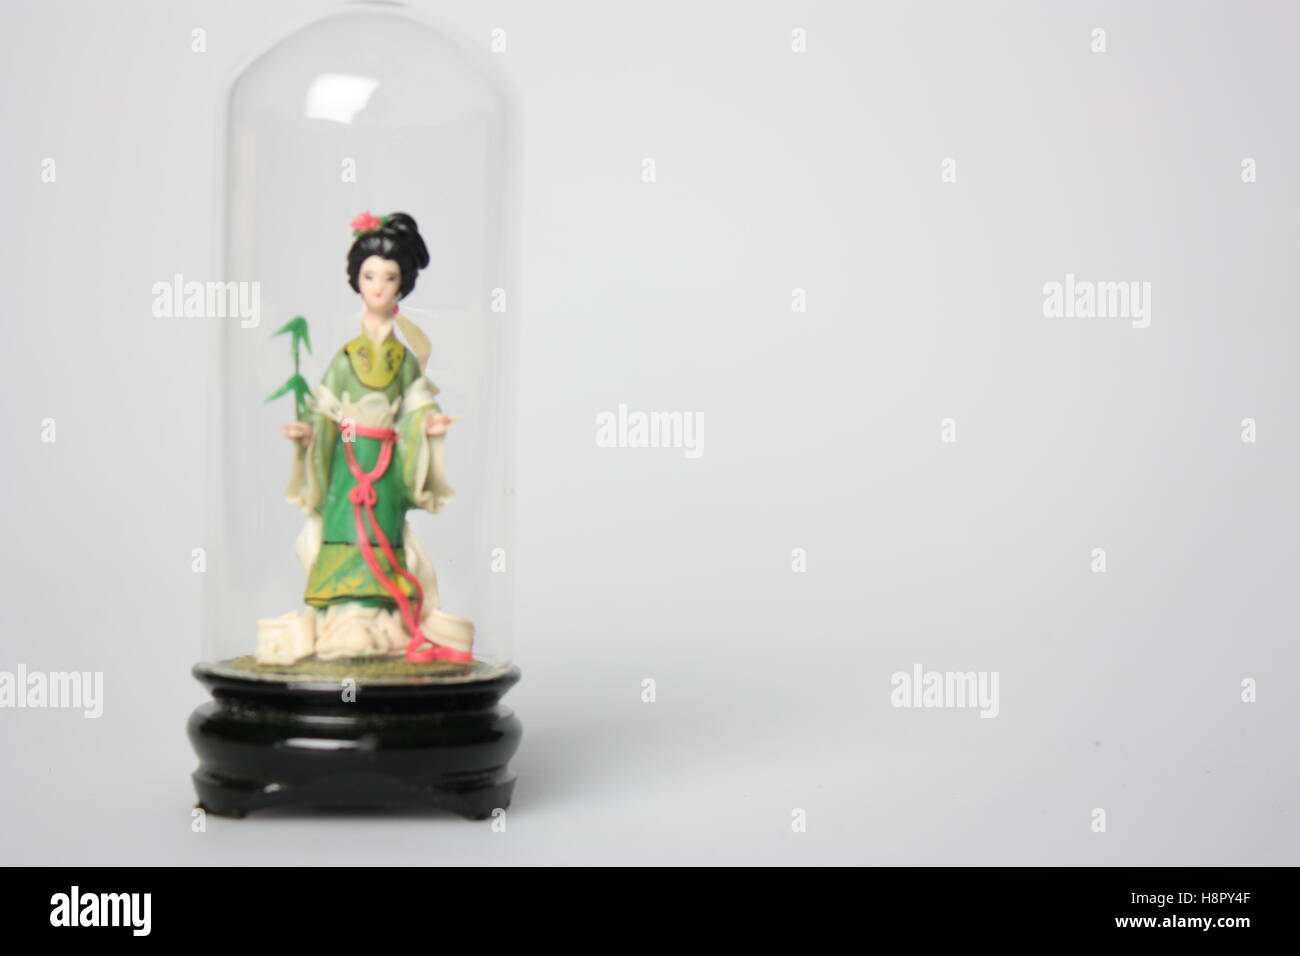 Still life chinese figure in a glass container beautiful delicate sculpture Stock Photo